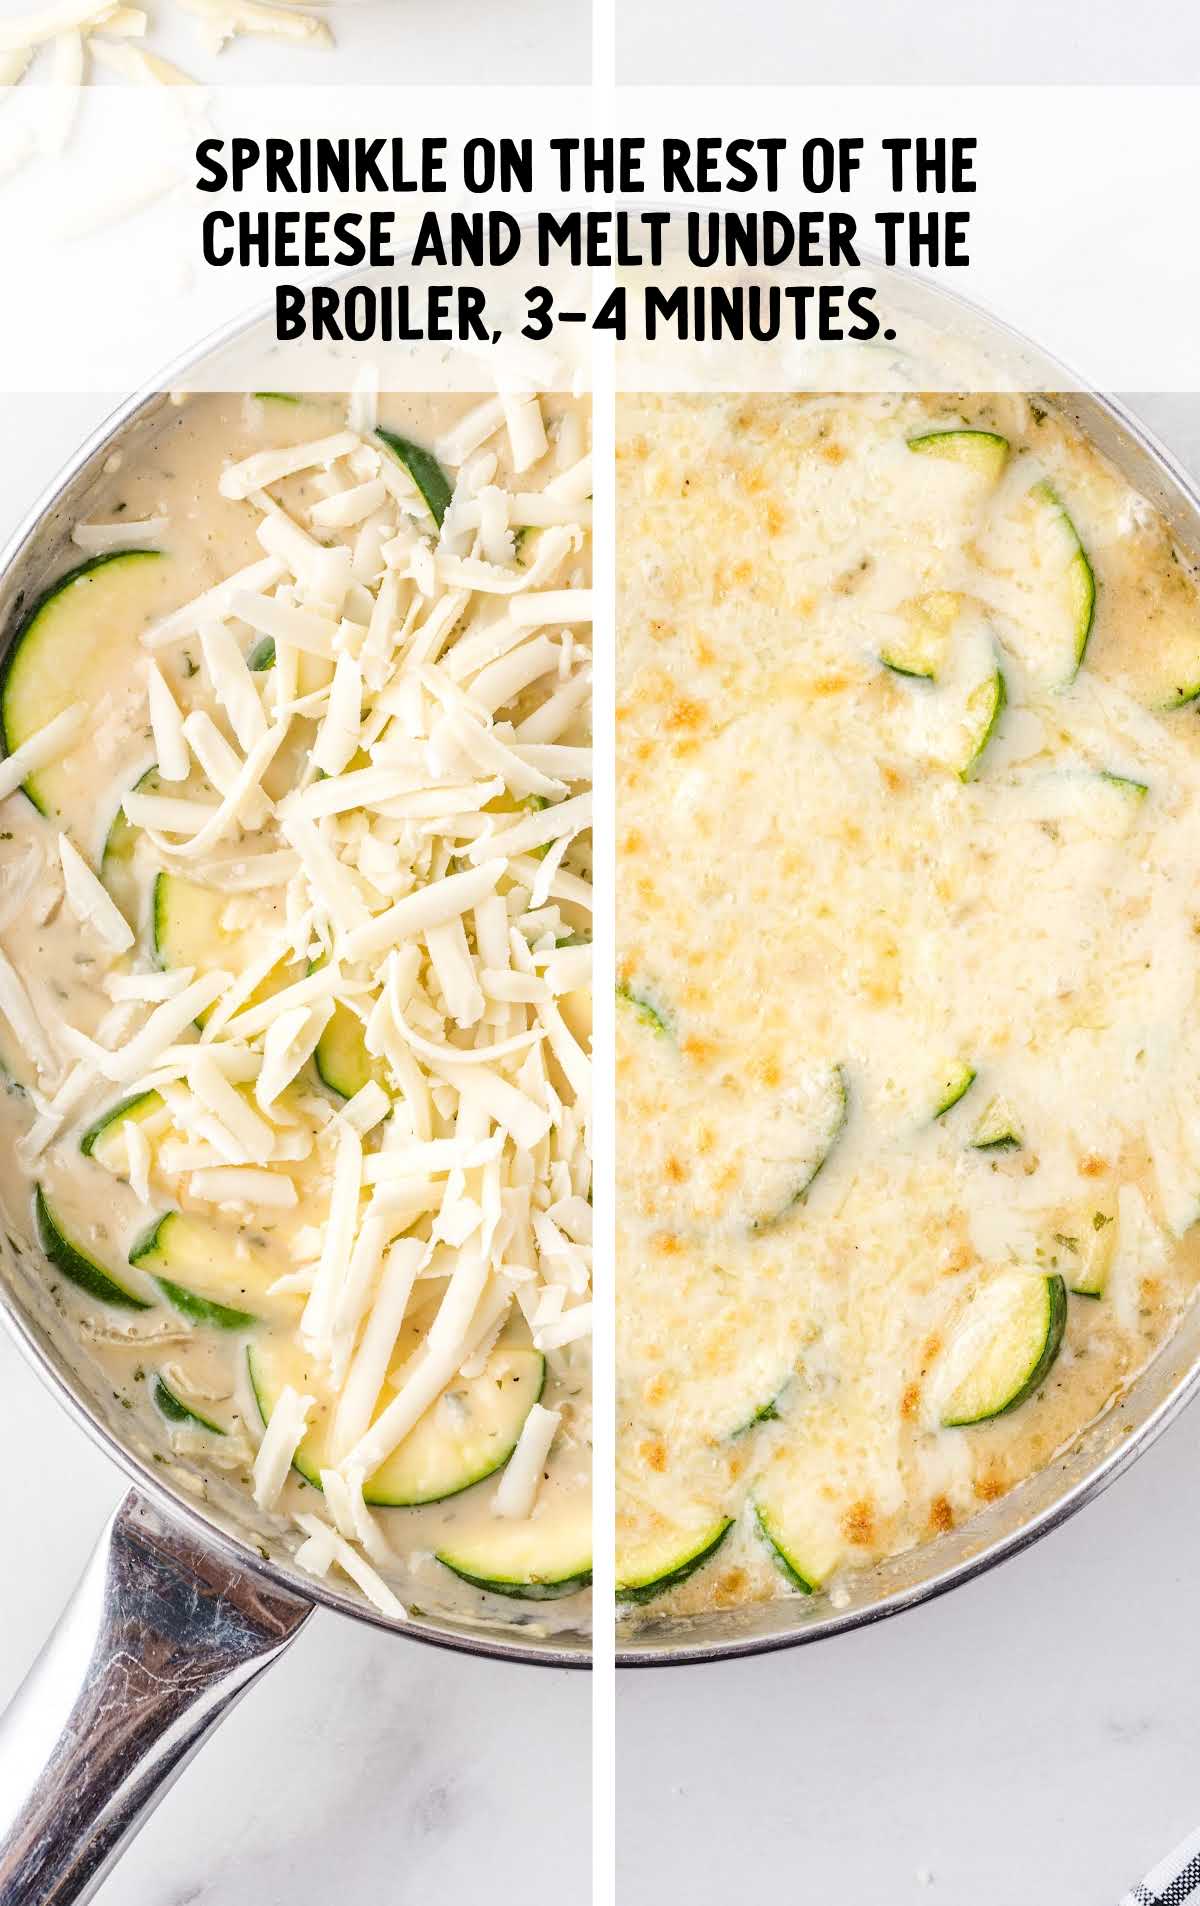 cheese sprinkled on top of the zucchini gratin in a skillet